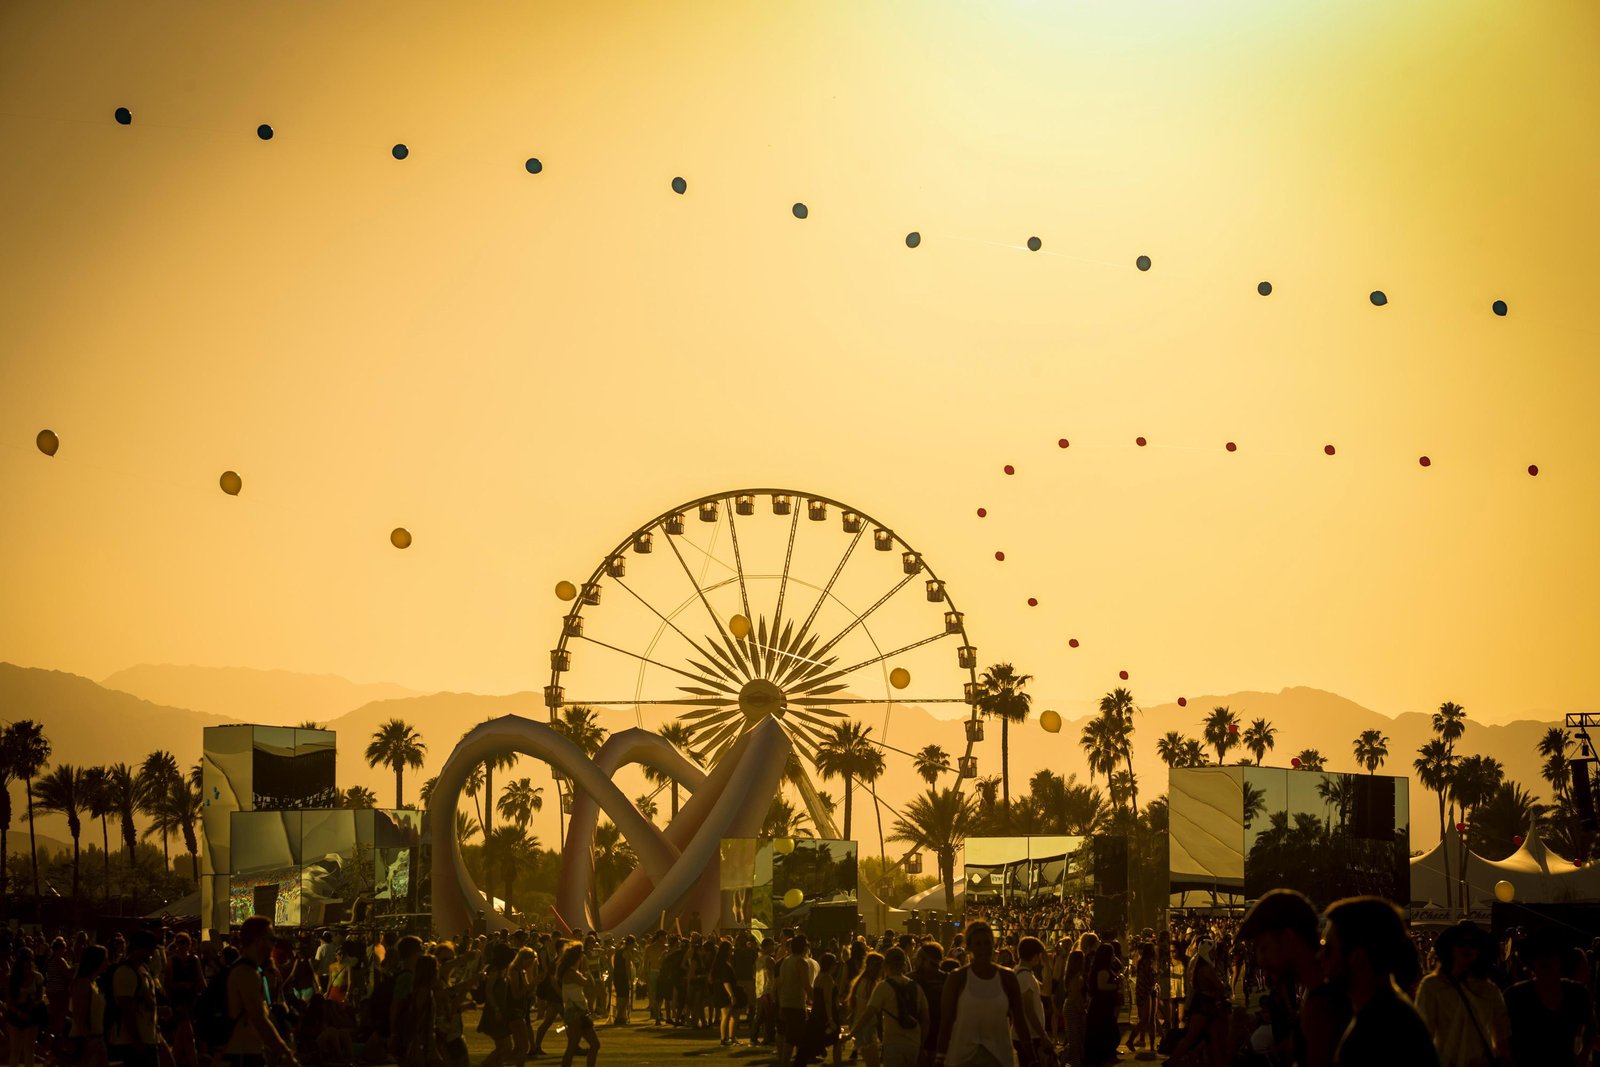 Sunset at Coachella in Indio, CA, USA on 13 April, 2014.